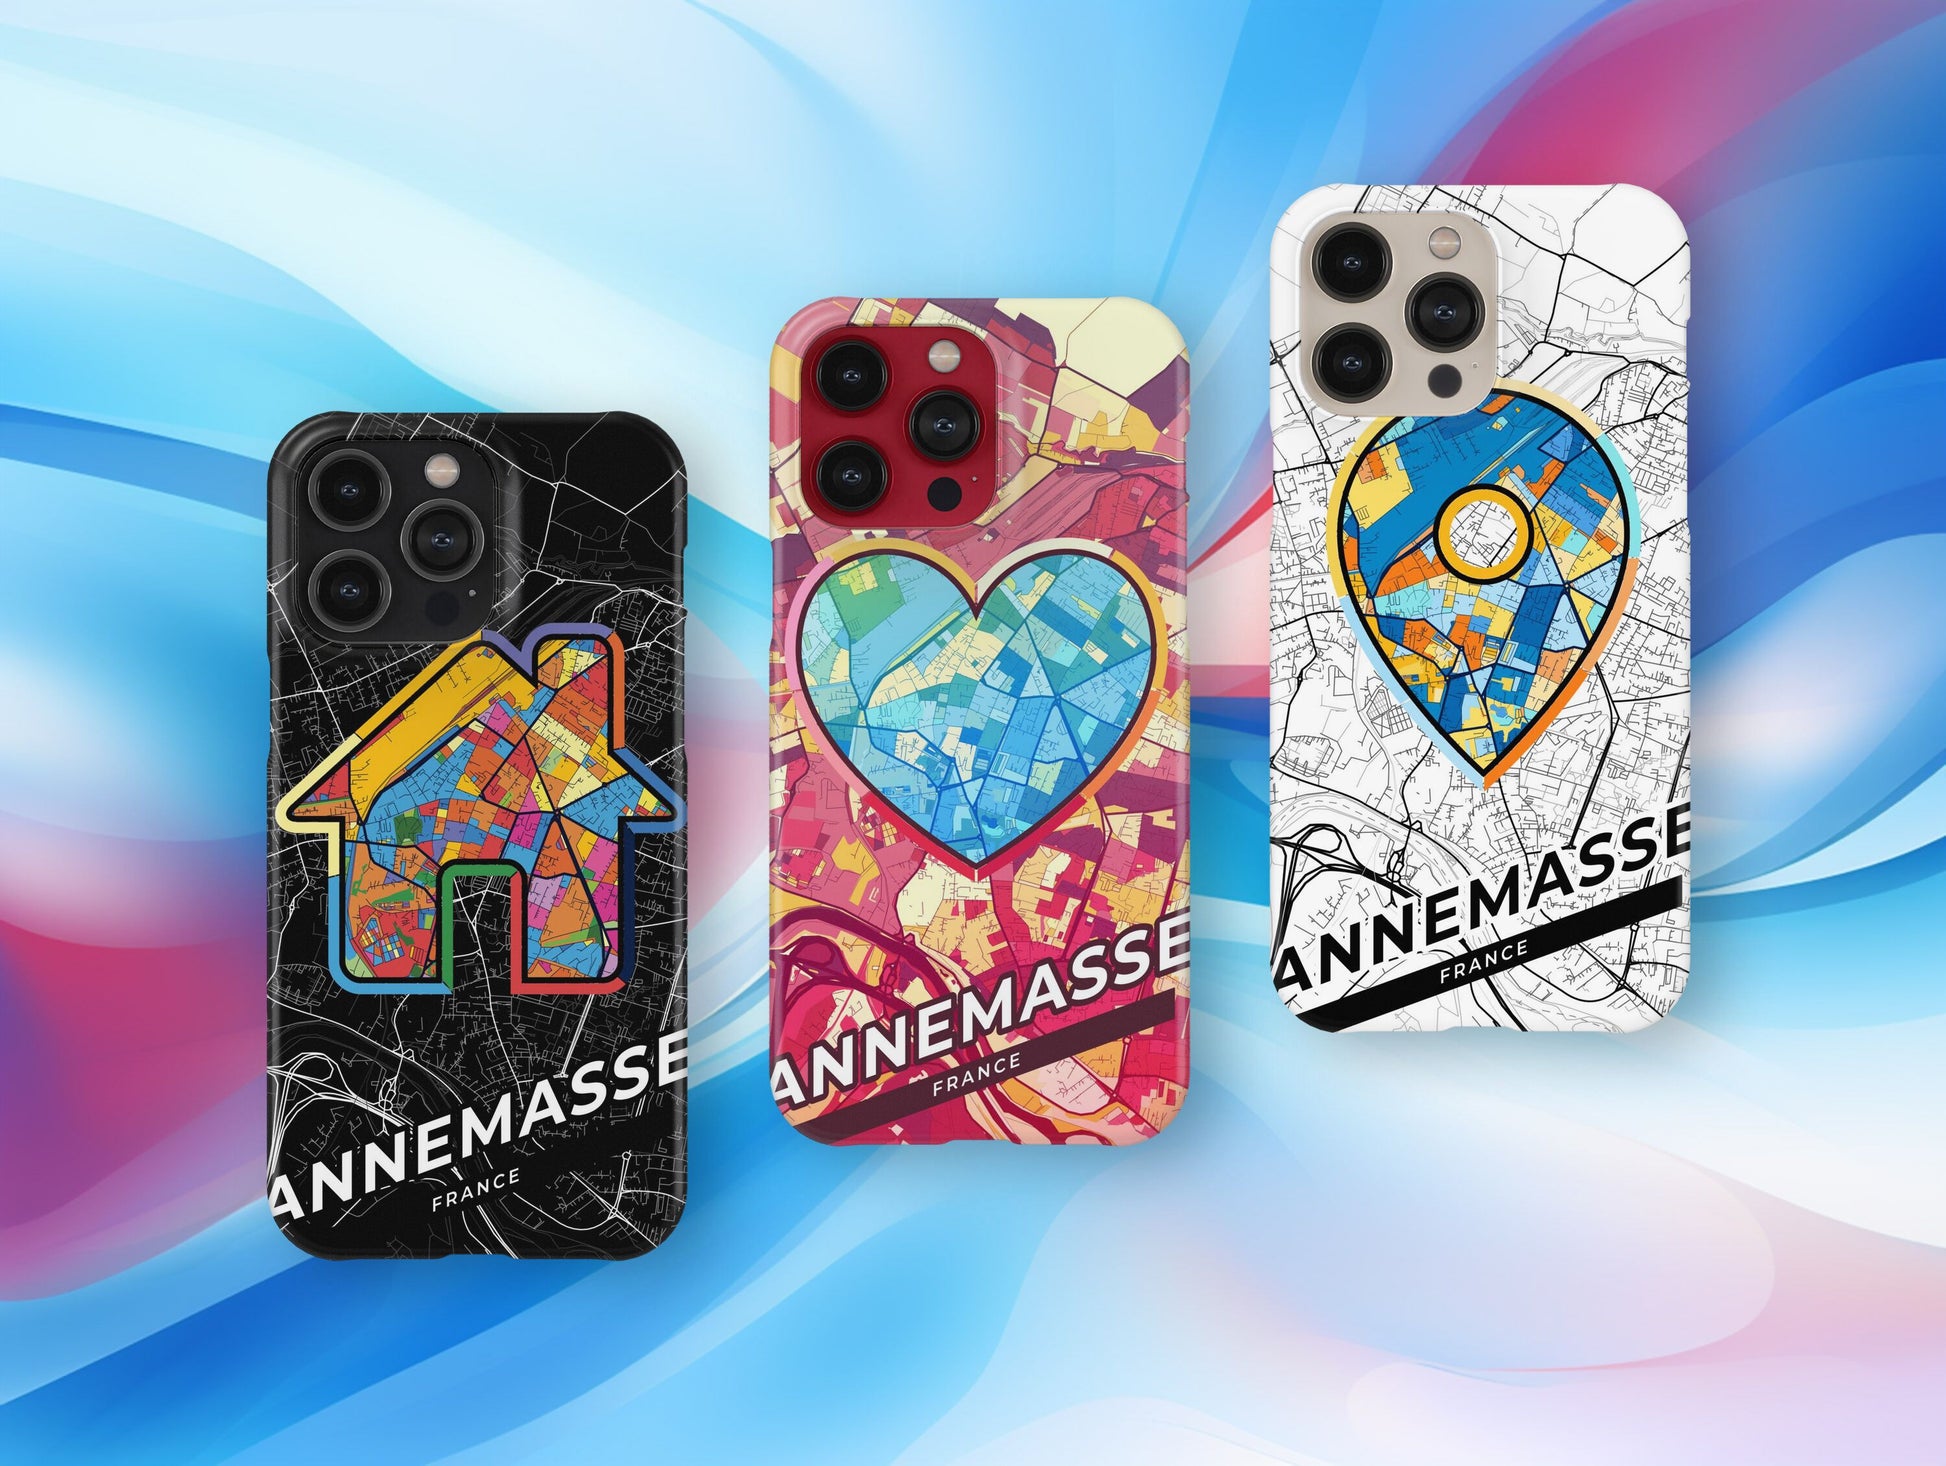 Annemasse France slim phone case with colorful icon. Birthday, wedding or housewarming gift. Couple match cases.